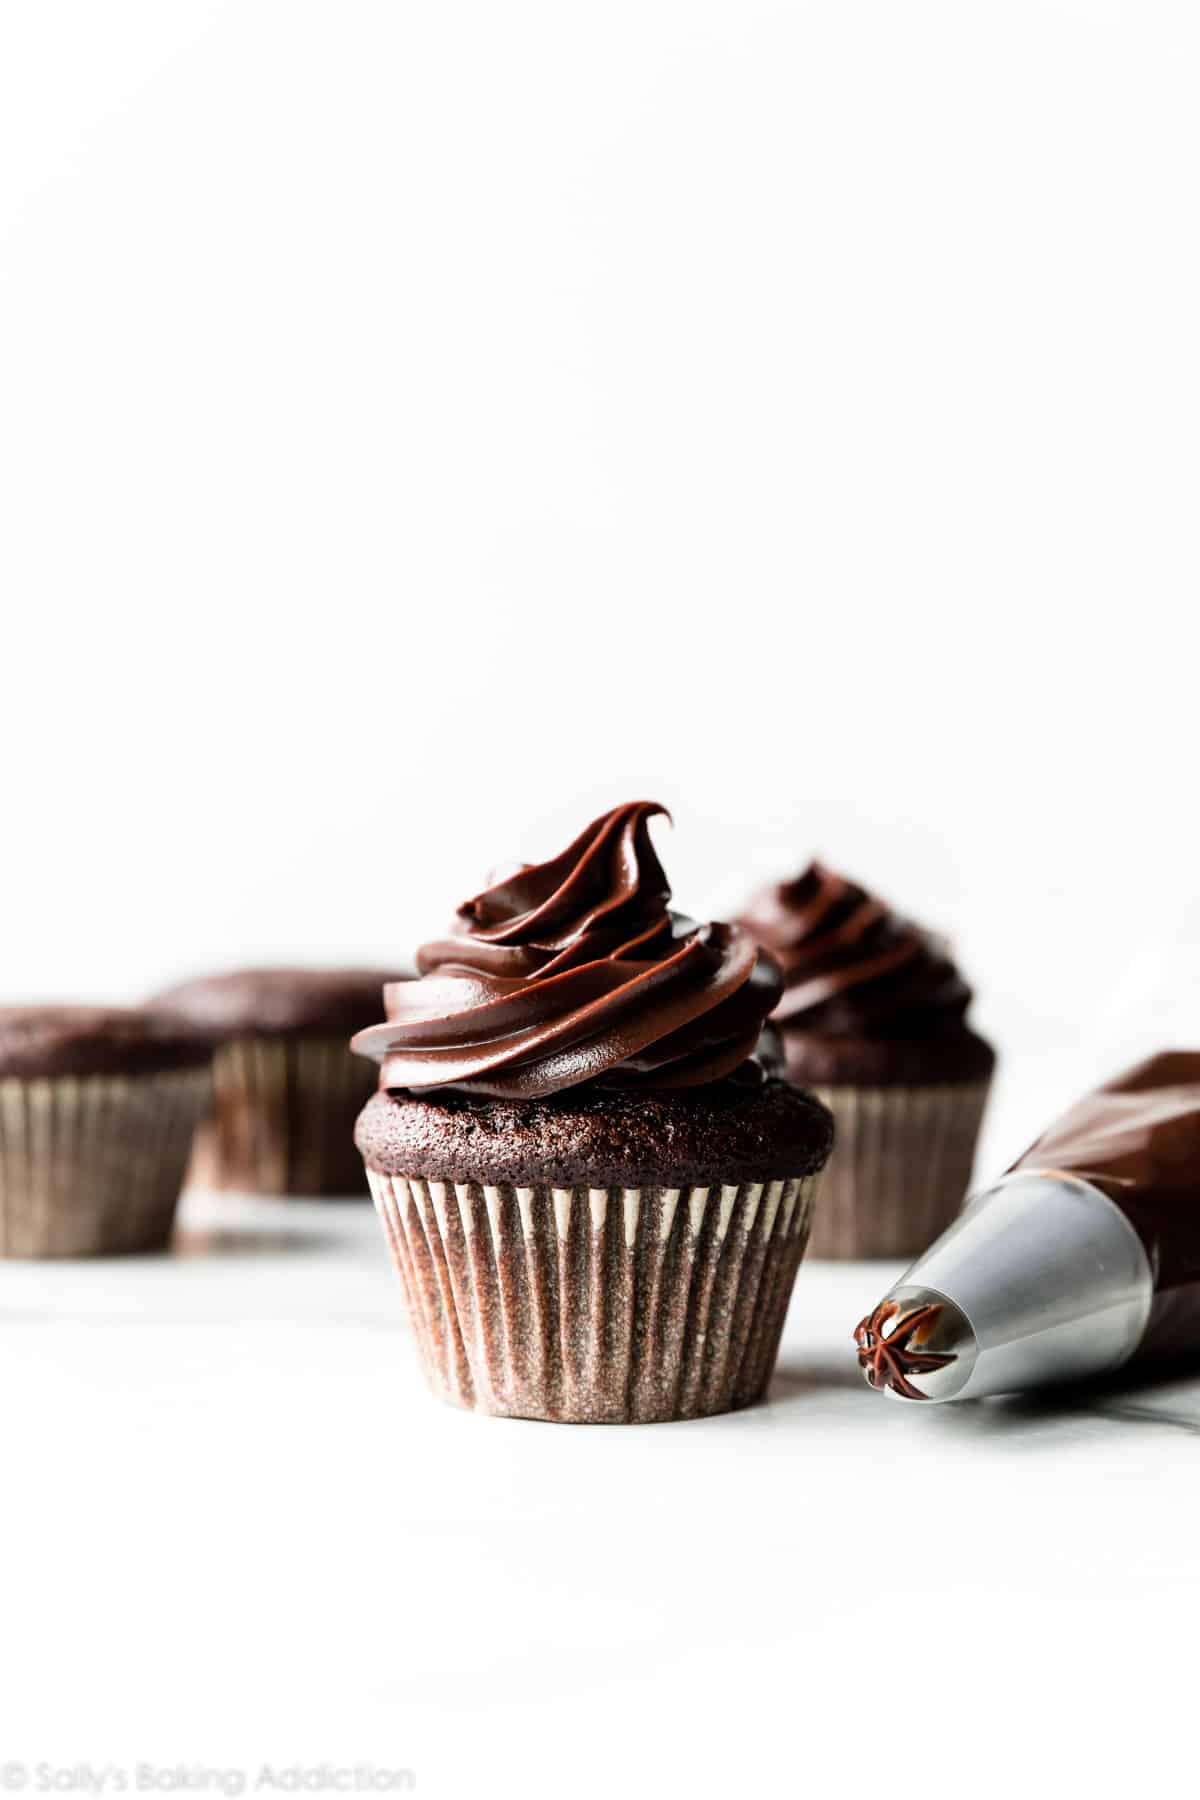 chocolate cupcakes with piped chocolate ganache